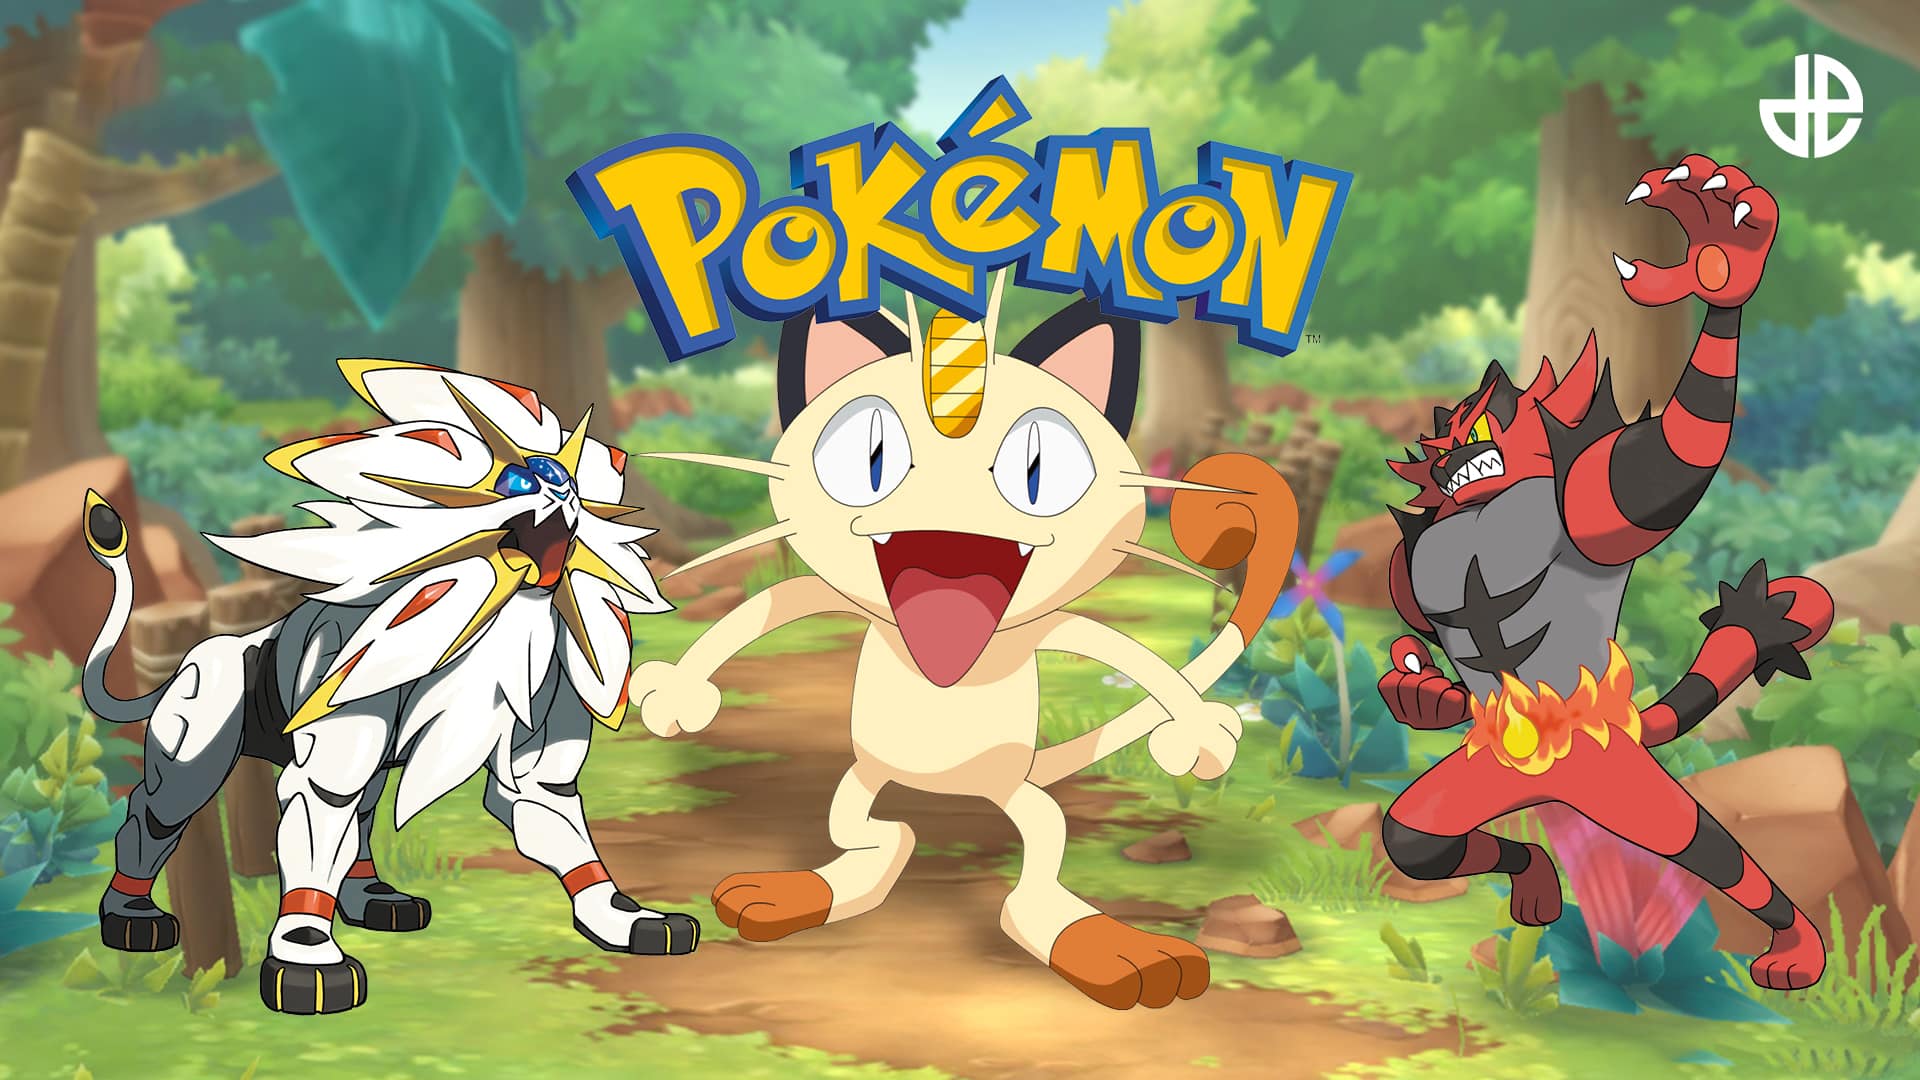 An image of Cat Pokemon from the Pokedex, including Meowth, Solgaleo, and Incineroar